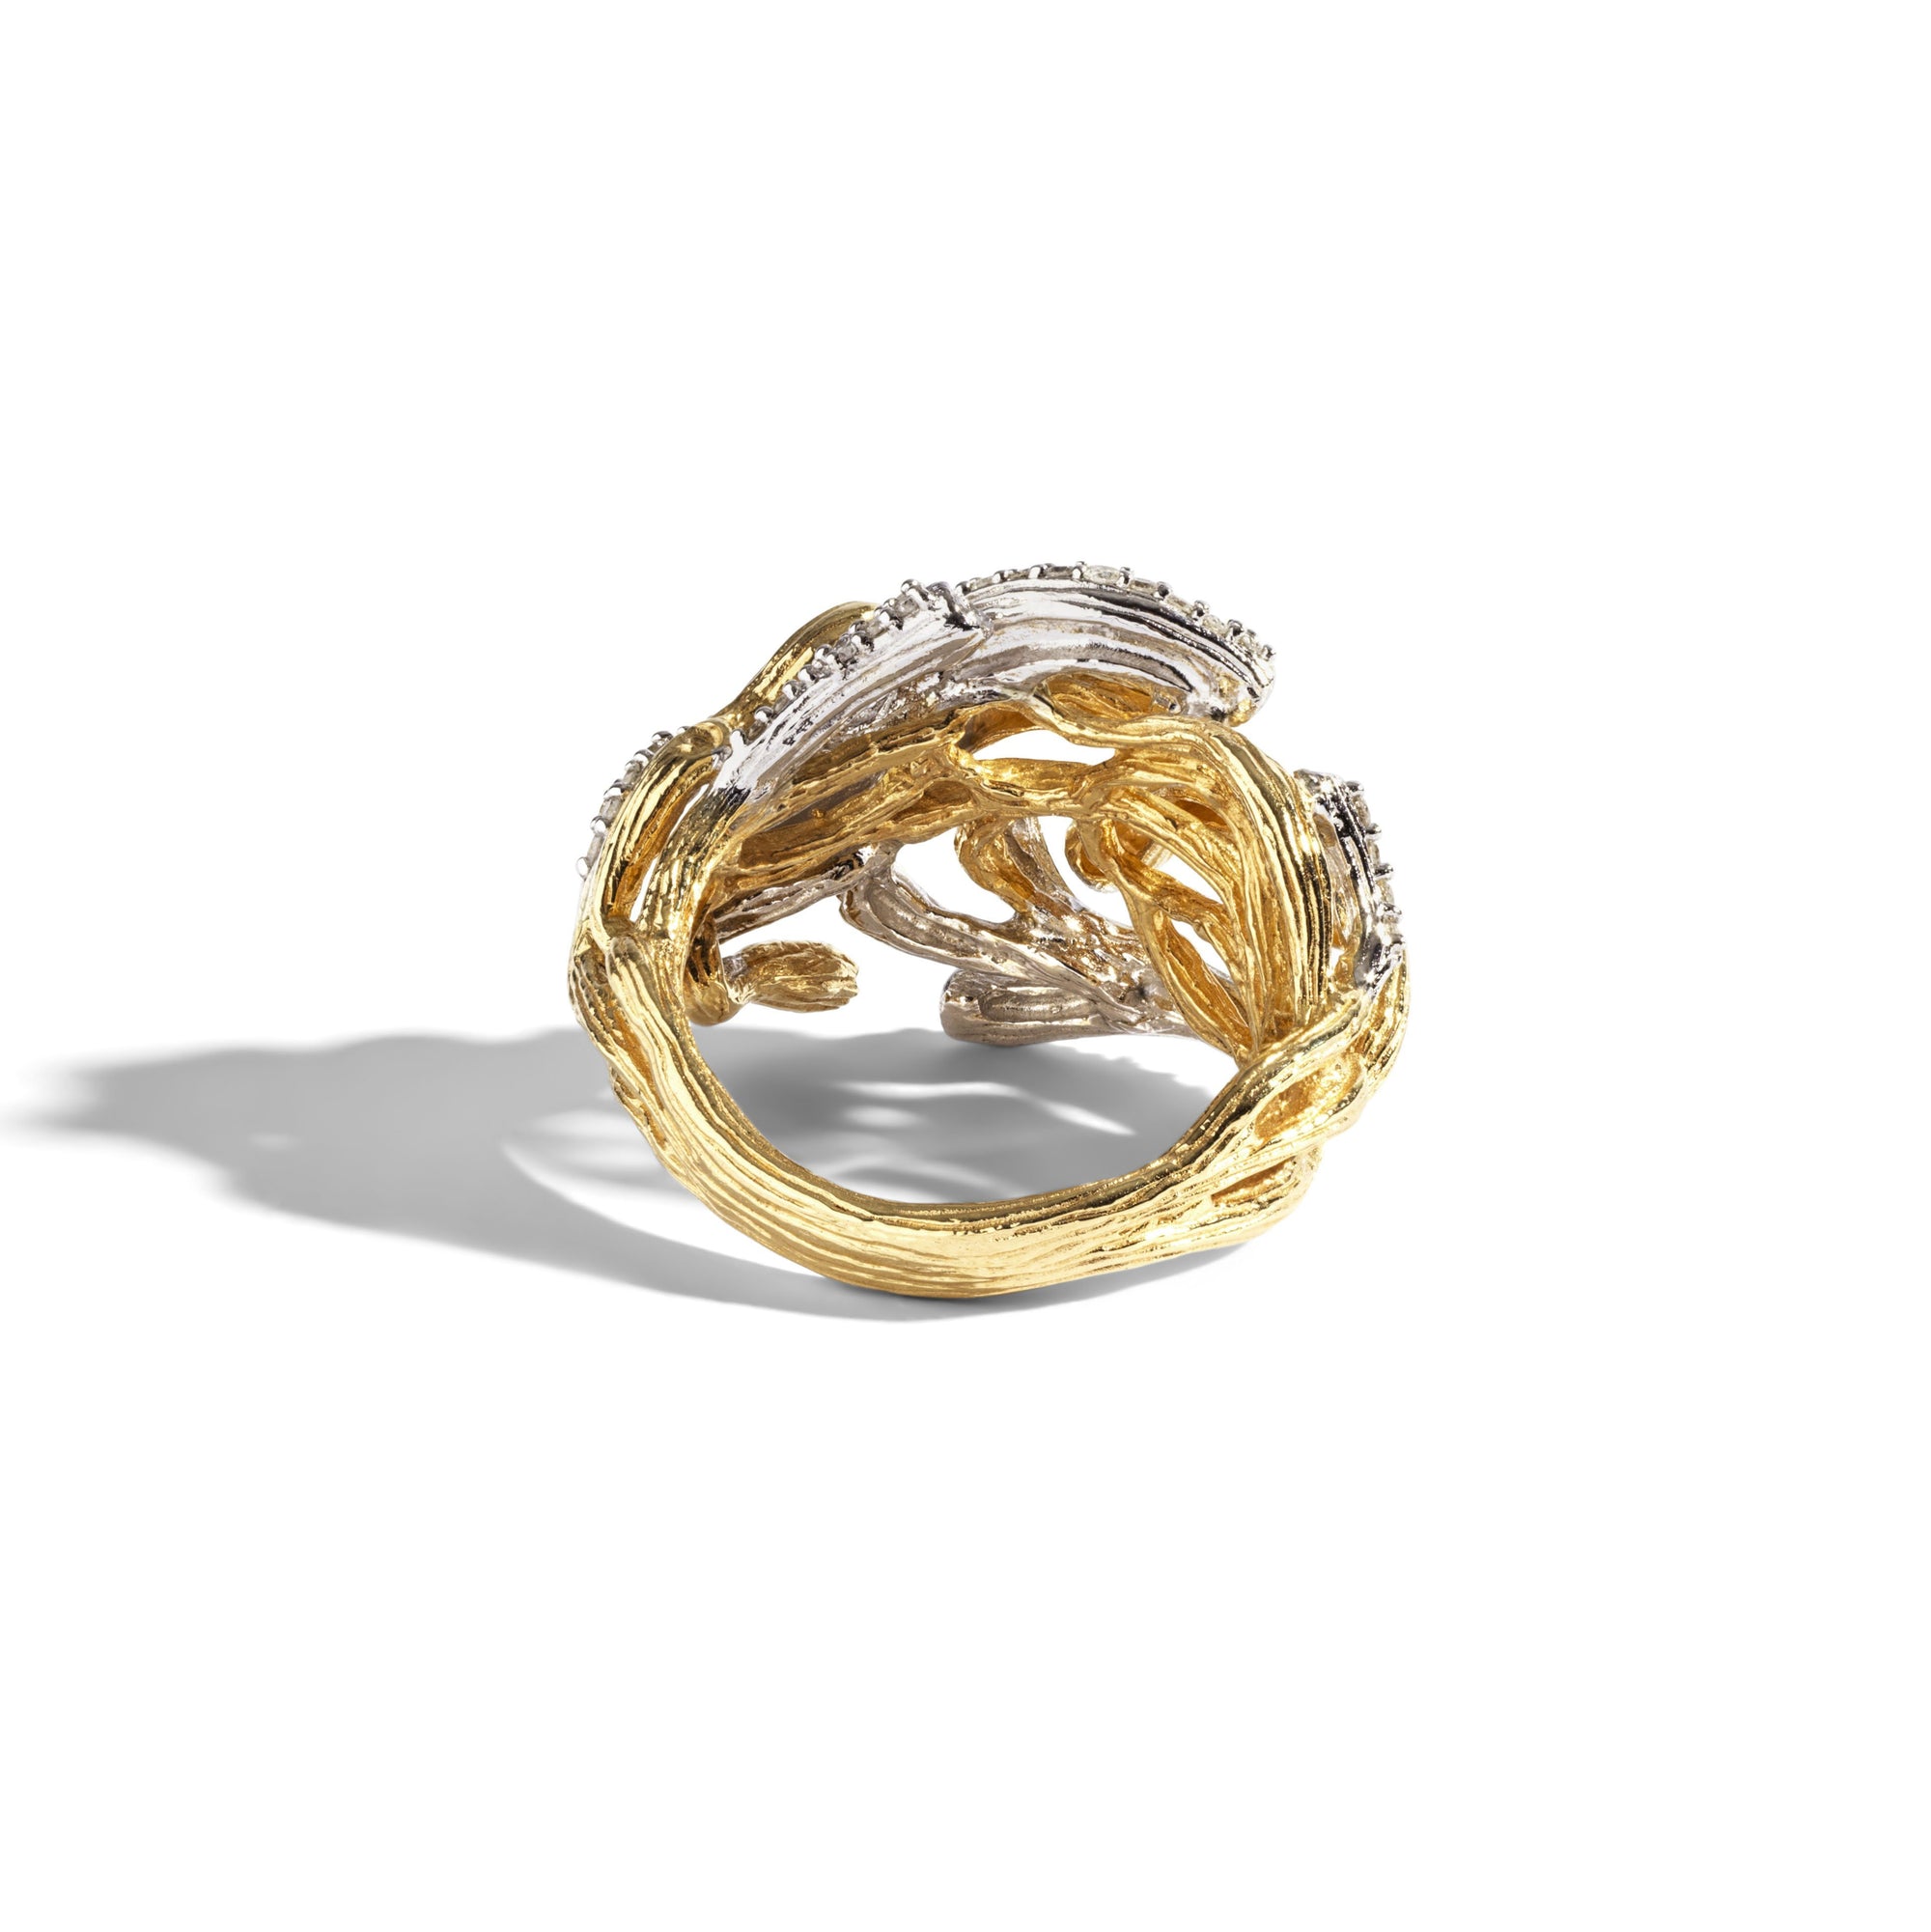 Michael Aram Branch Coral Ring with Diamonds